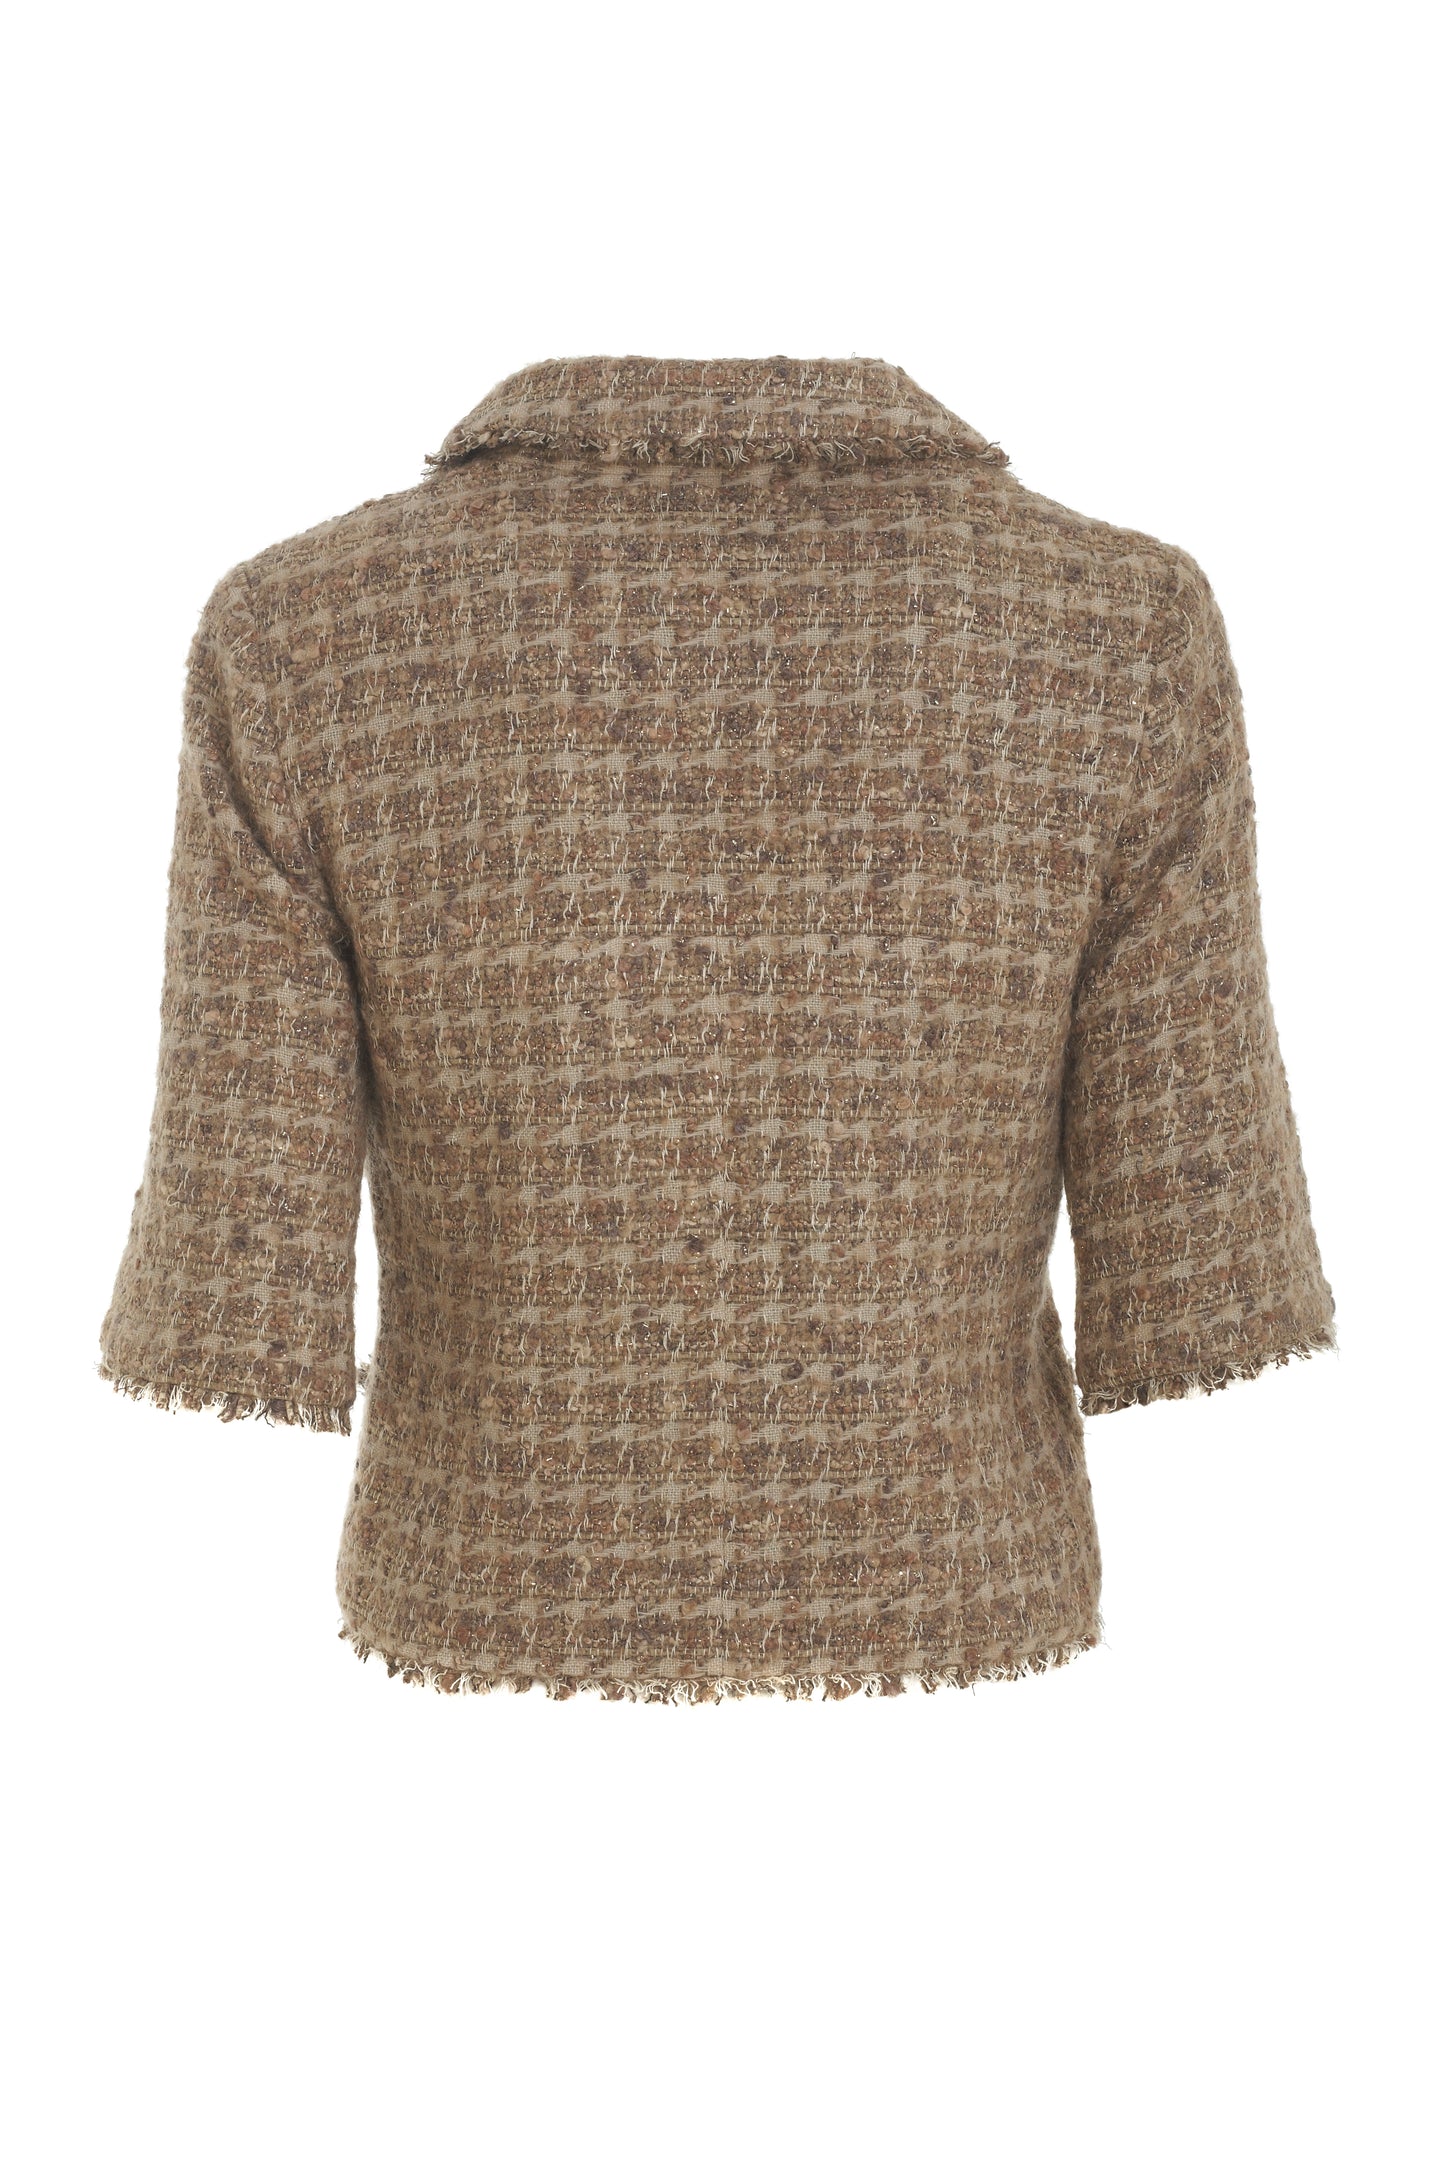 Chanel champagne, pink and moss green boucle jacket with 3/4 sleeves